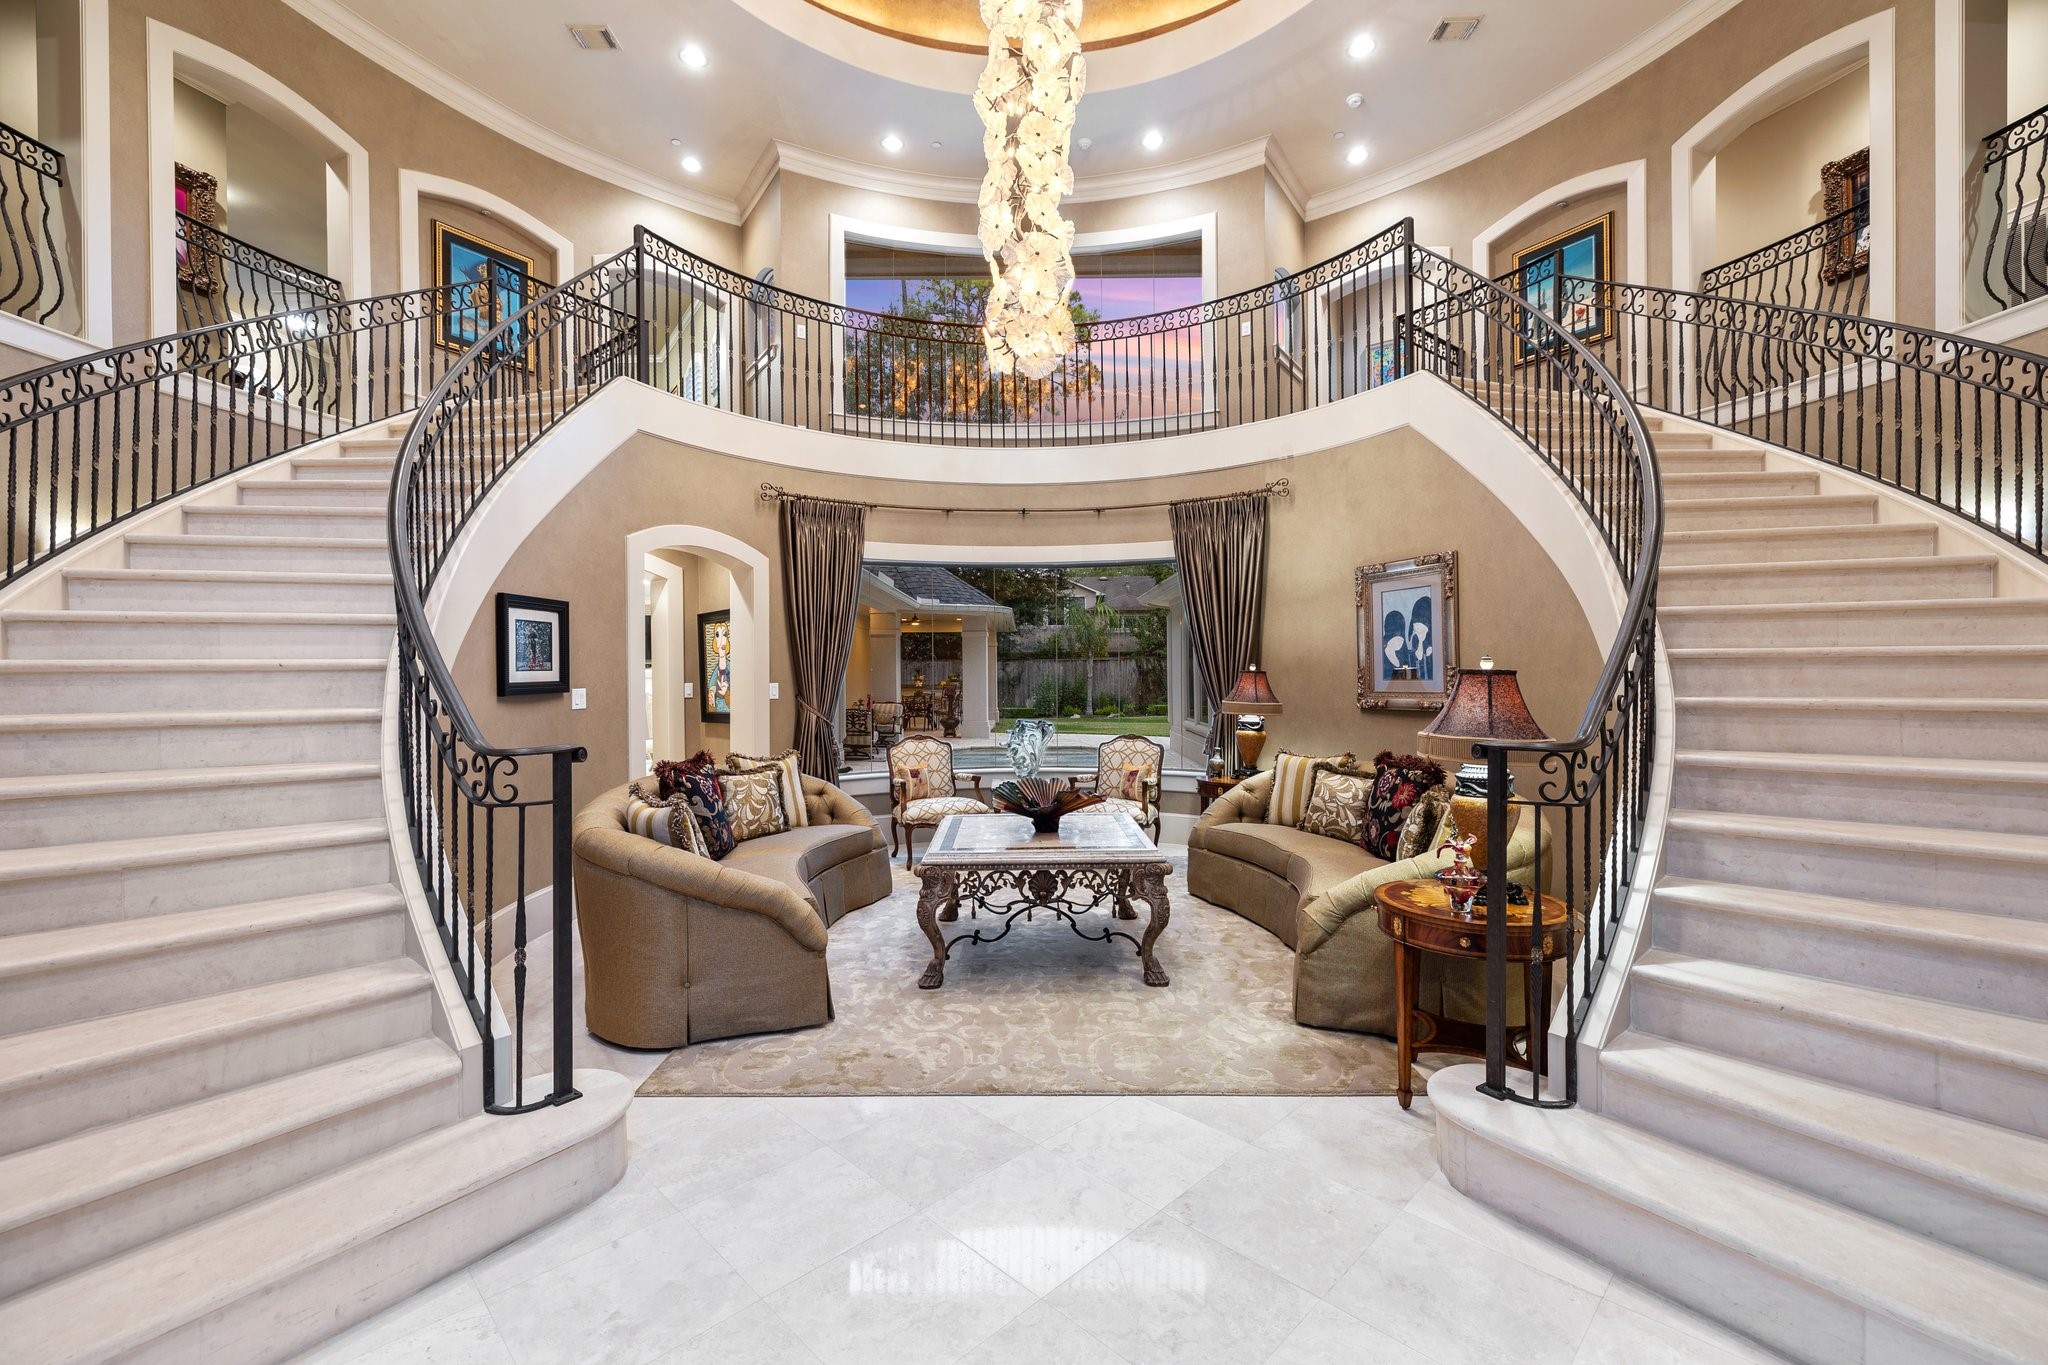 This prestigious residence combines grandeur with modern living. The front entry with dual limestone staircases exudes timeless elegance.